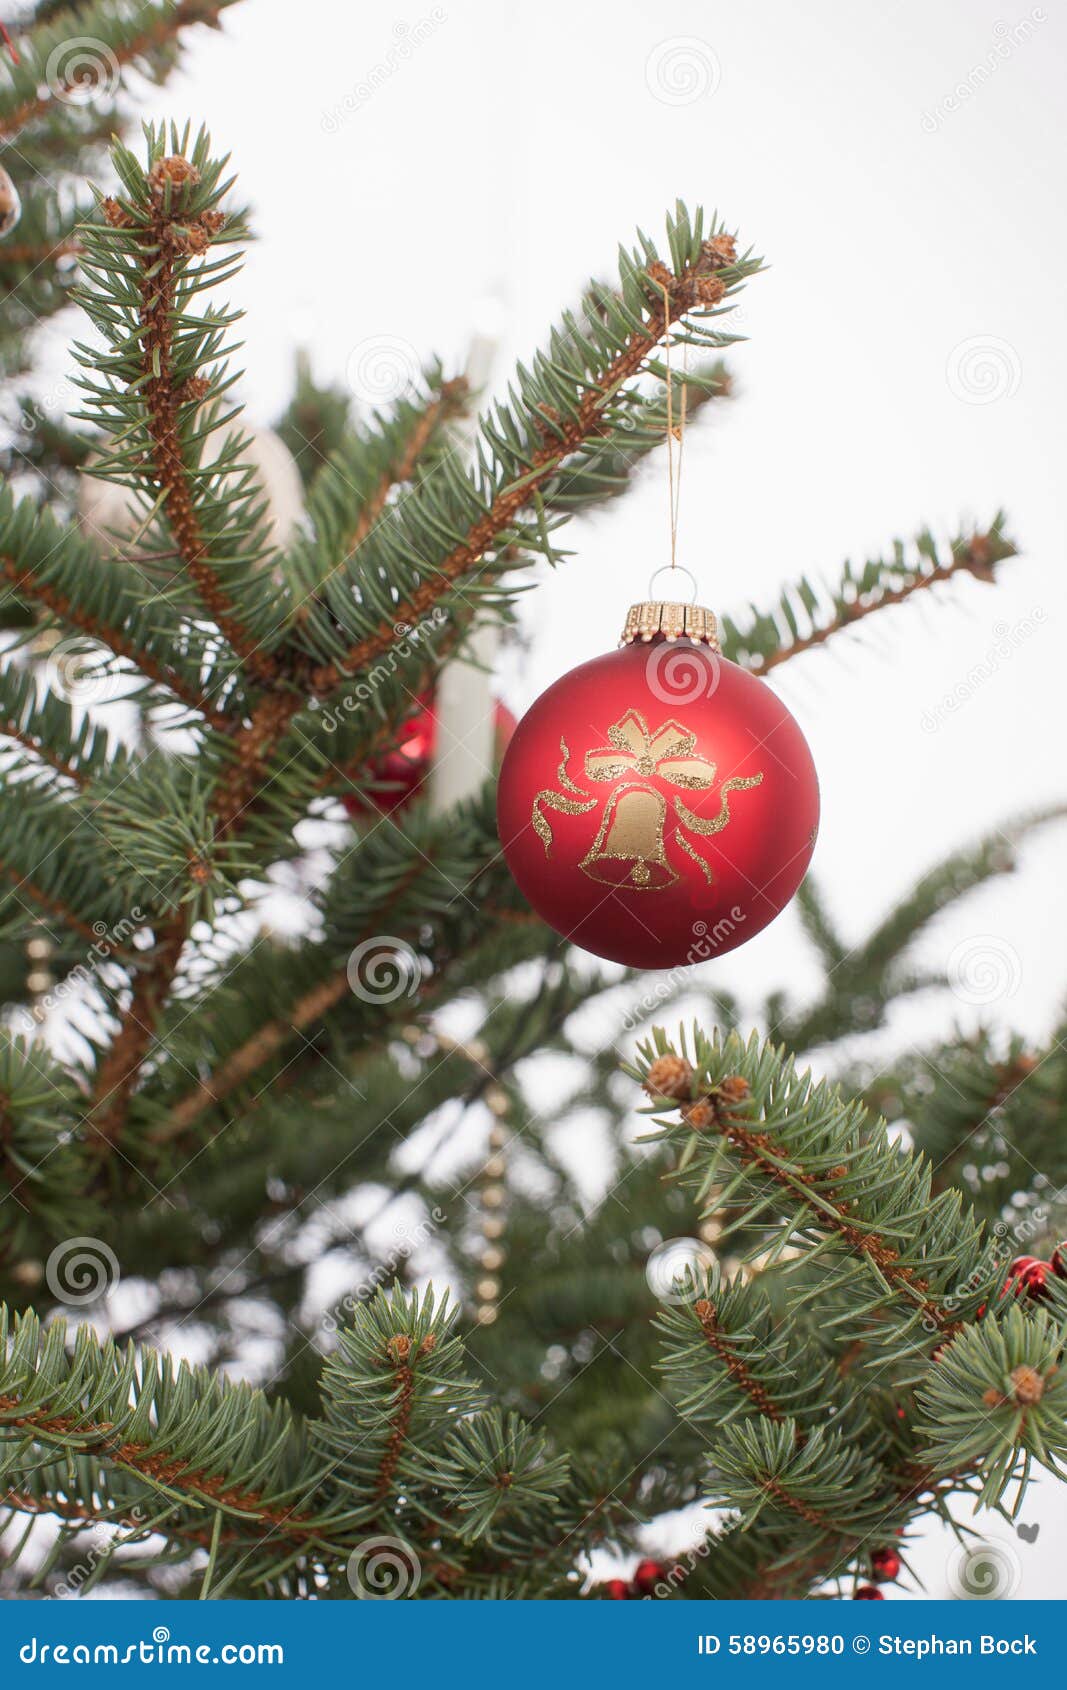 Christmas Tree with Ornaments Stock Photo - Image of bauble, background ...